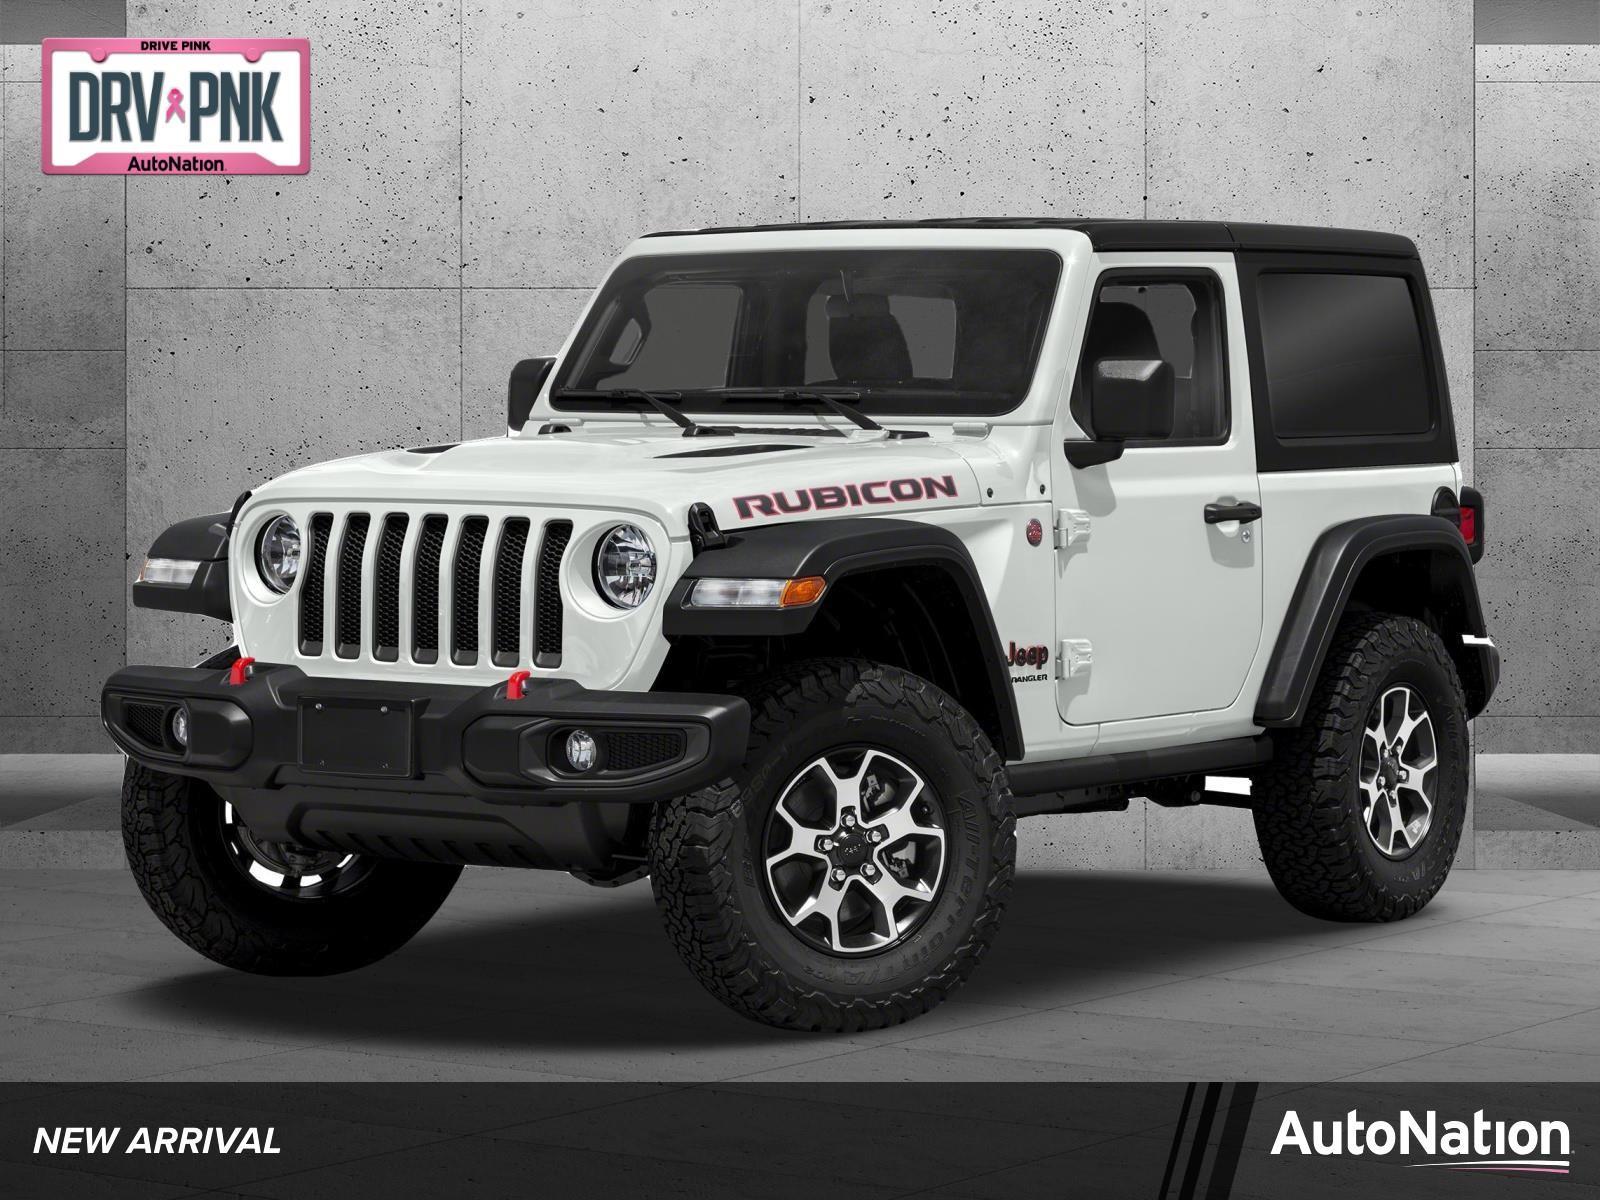 USED 2021 Jeep Wrangler for sale in Austin, TX 78745 - AutoNation